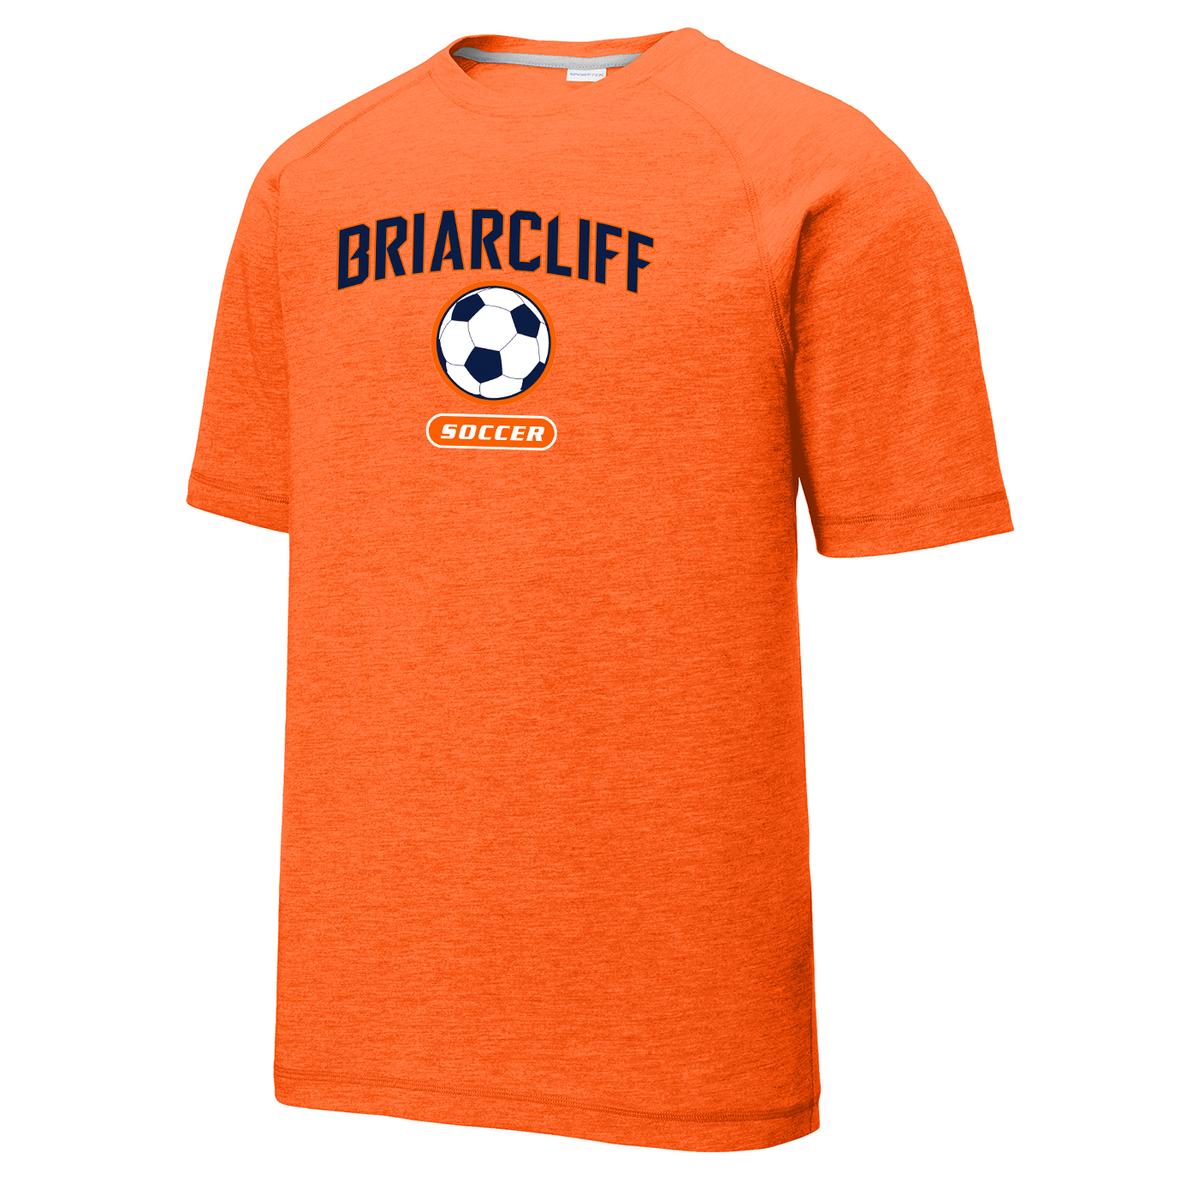 Briarcliff Soccer Raglan CottonTouch Tee